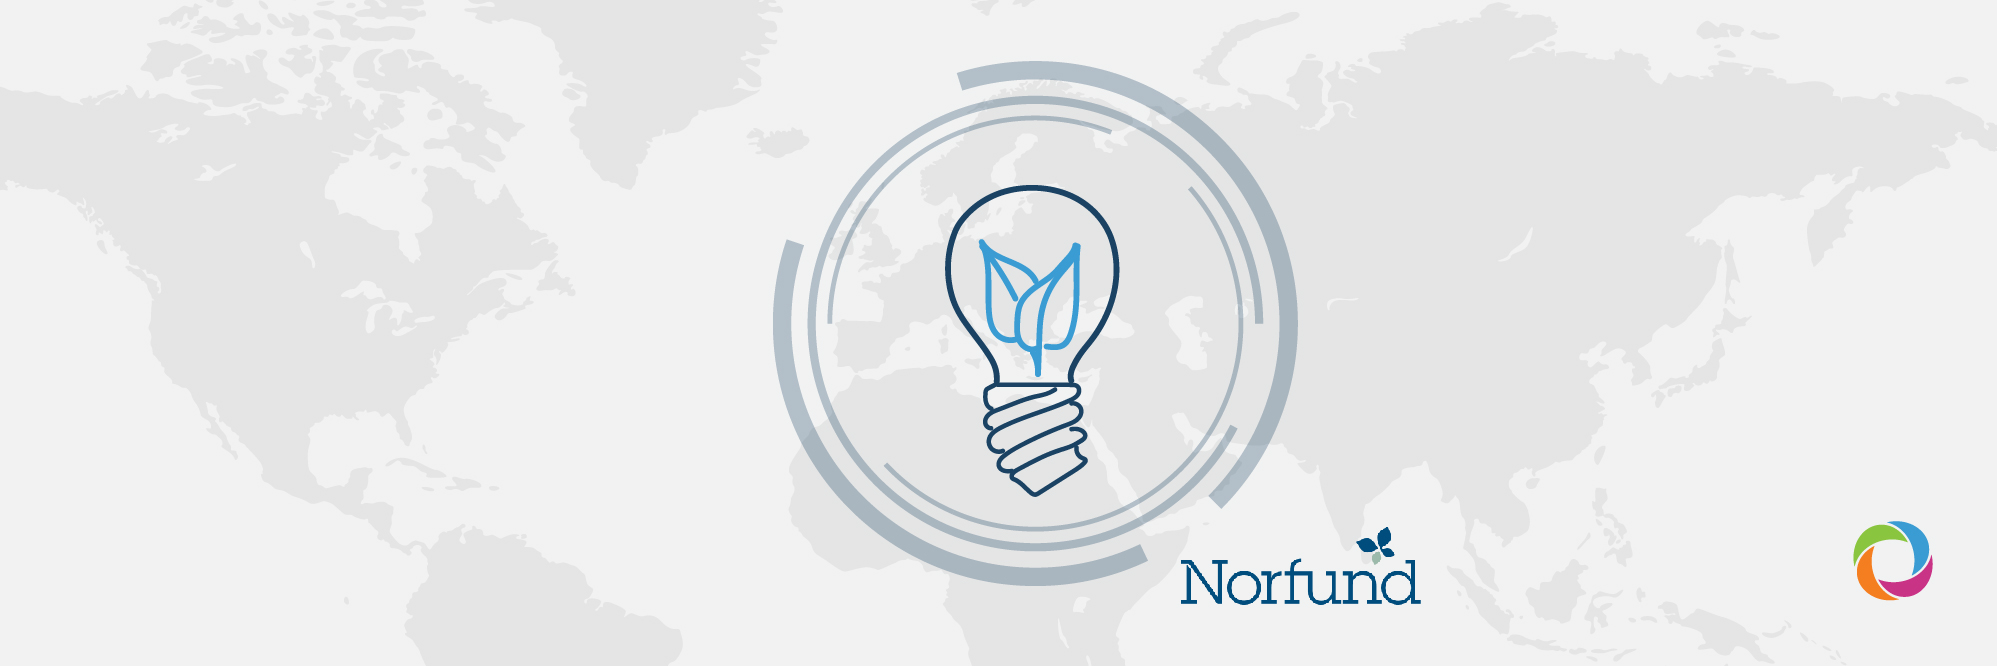 DFI Files: Norfund - Norway’s Investment Fund with a strategic focus on clean energy projects